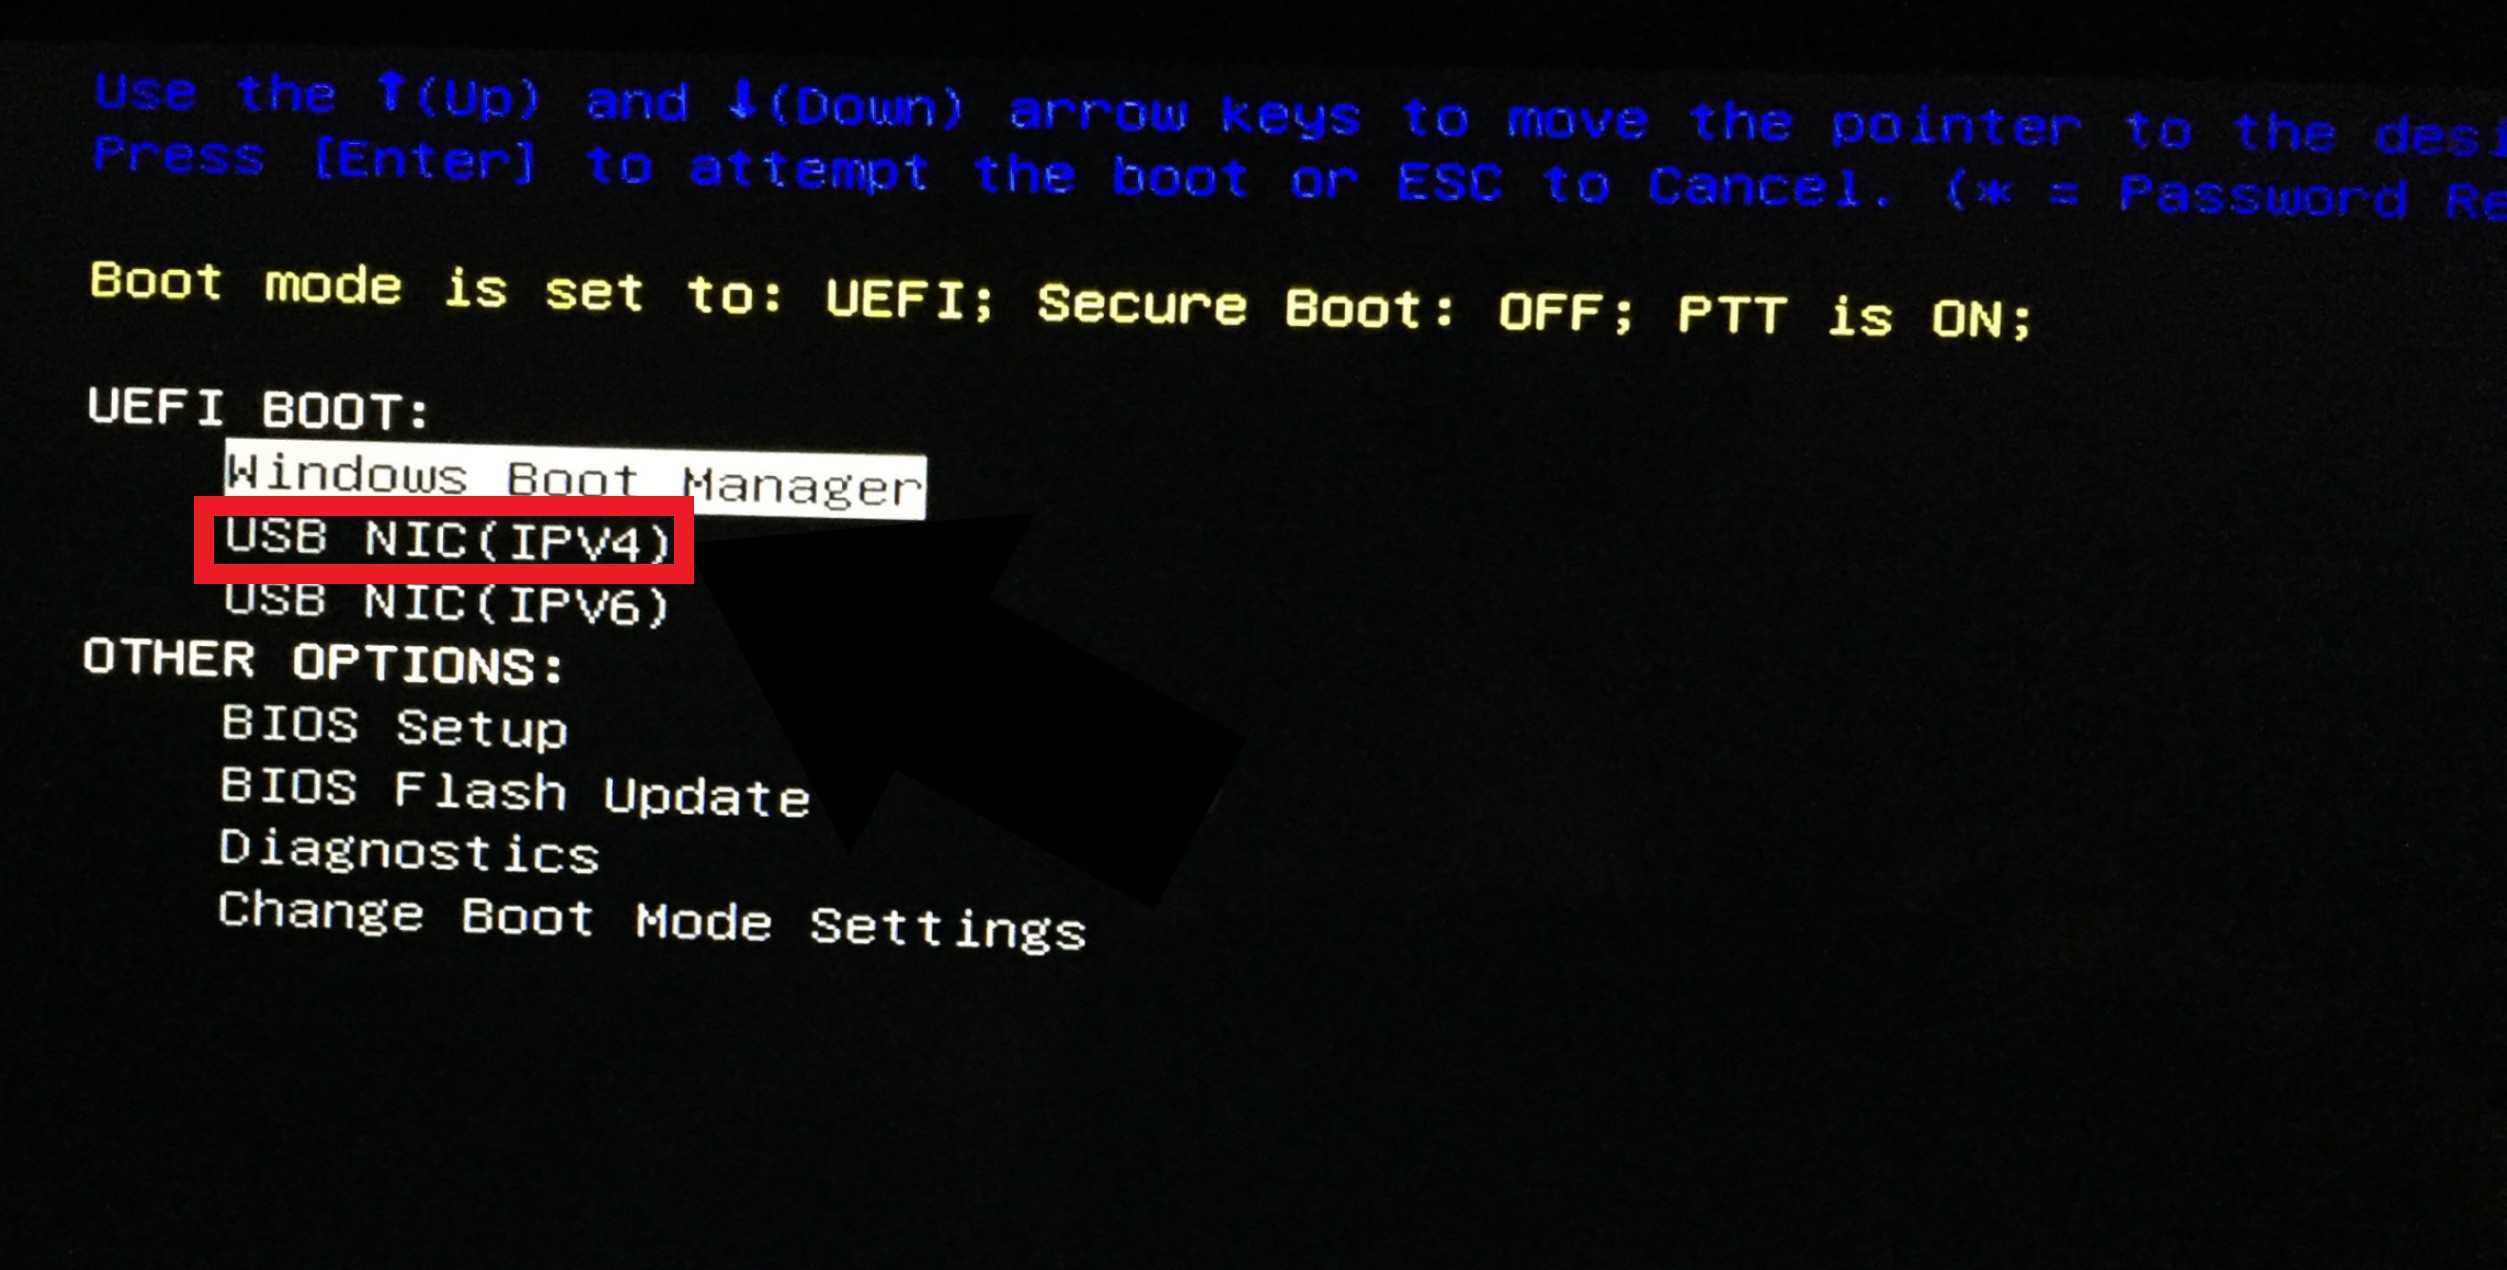 f12 to boot from usb main